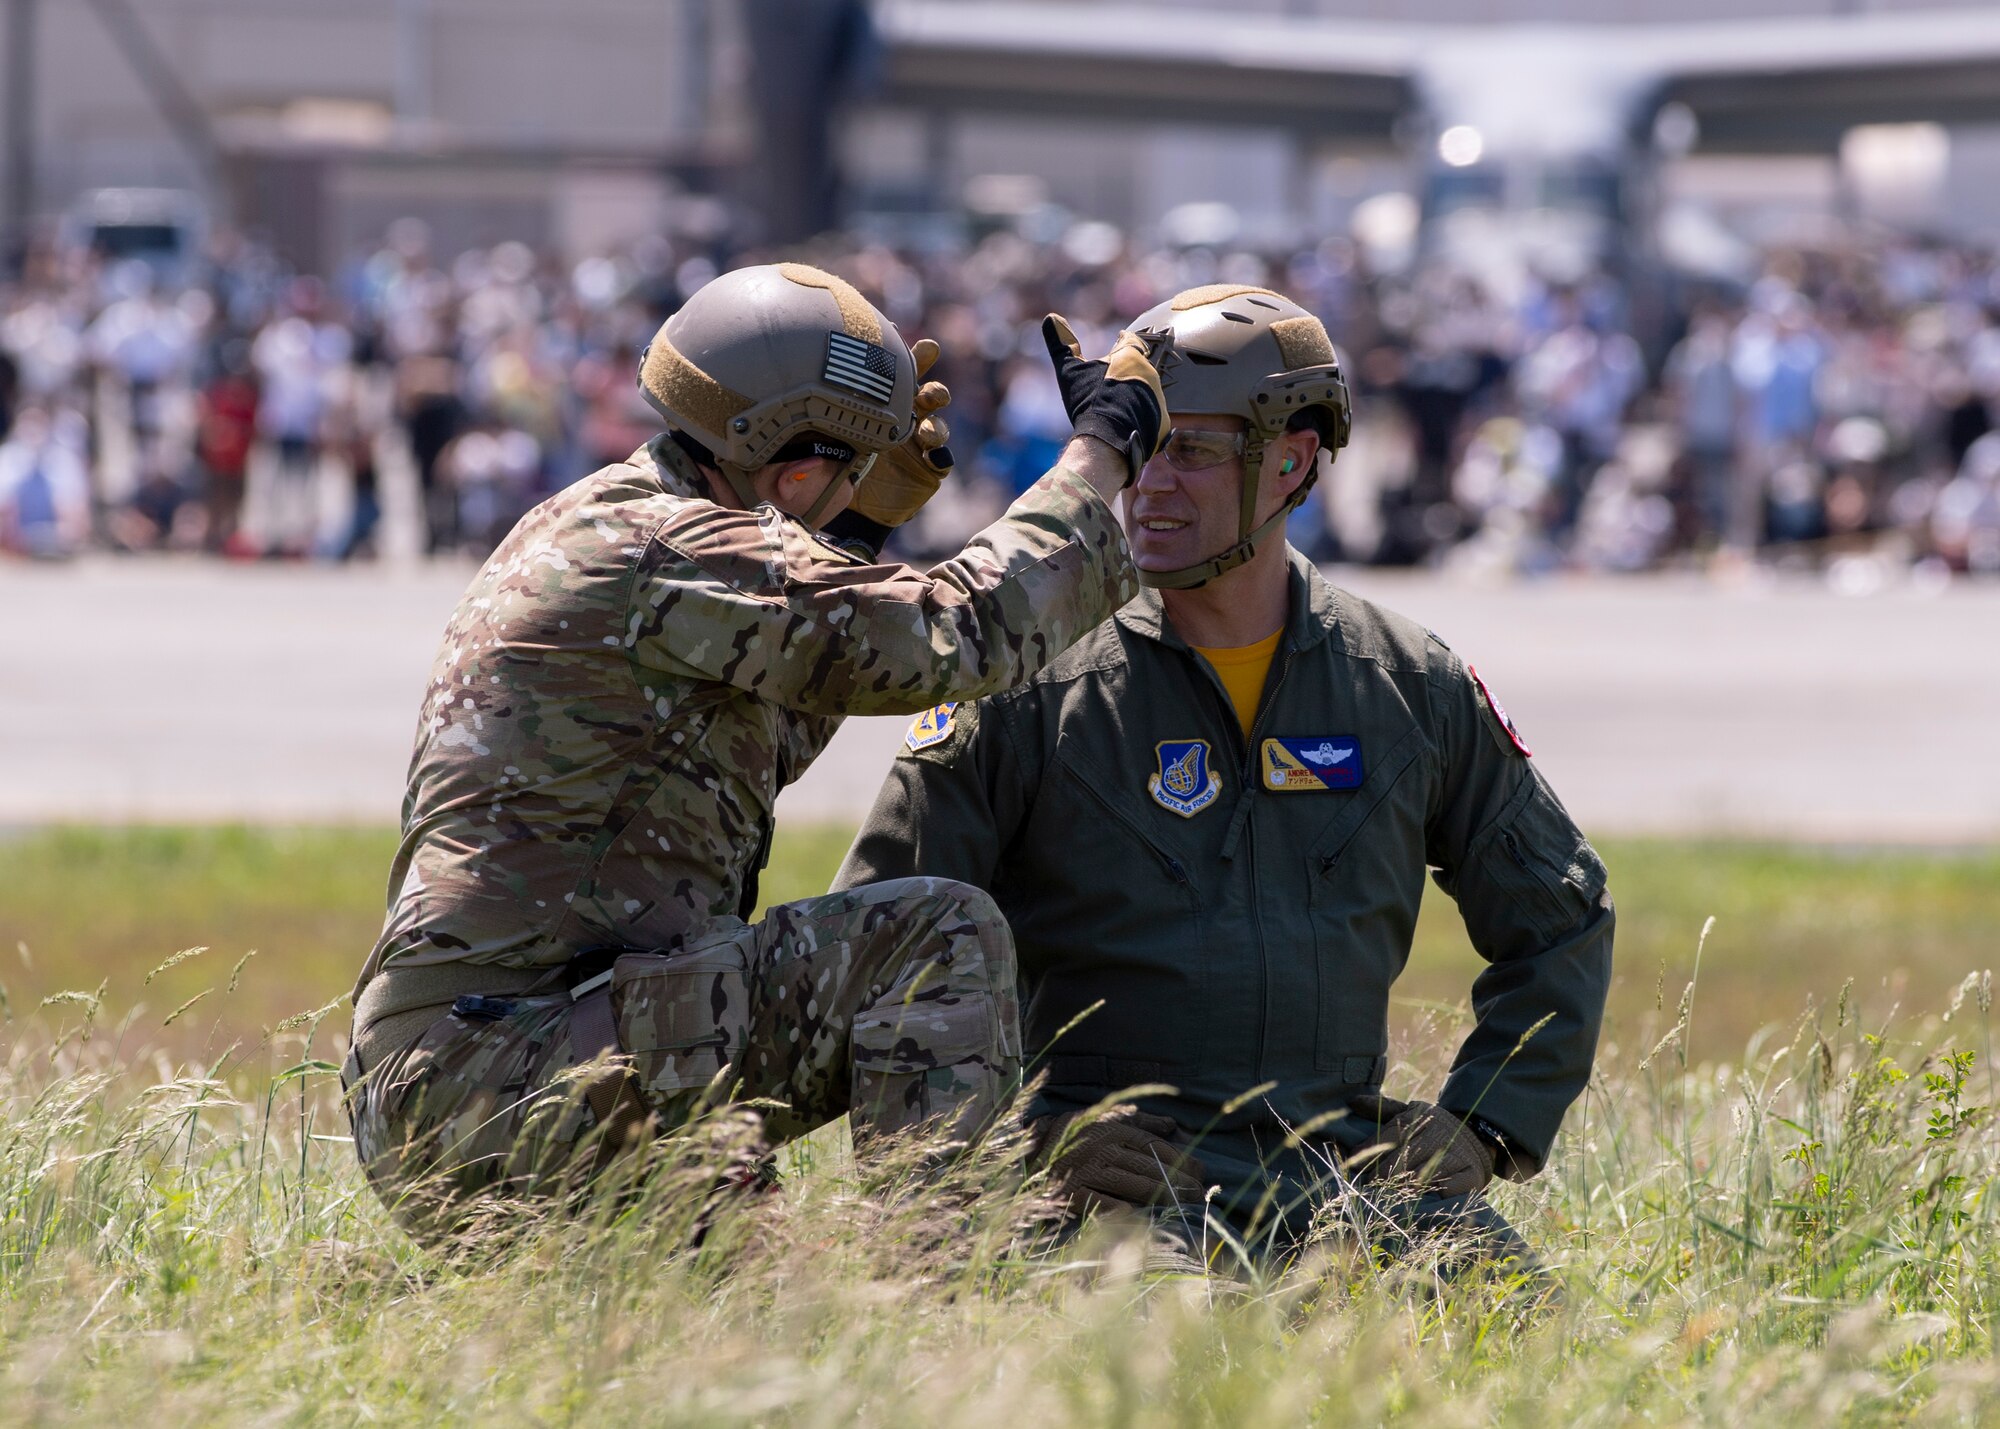 Col. Andrew Campbell, 374th Airlift Wing commander, is briefed on how to don a sling harness by Tech. Sgt. Mark Rosenboom, 374th Operational Support Squadron Survival Evasion Resistance Escape specialist, during a UH-1 rescue demonstration at the Friendship Festival 2022, at Yokota Air Base, Japan, May 22, 2022. The two-day festival was an opportunity for visitors to learn more about the U.S. and Japan bilateral partnership, while strengthening the bonds between Yokota and the local communities. Yokota was able to host the event with the support of Japanese Self-Defense Force, sister services and the local community. (U.S. Air Force photo by Staff Sgt. Ryan Lackey)